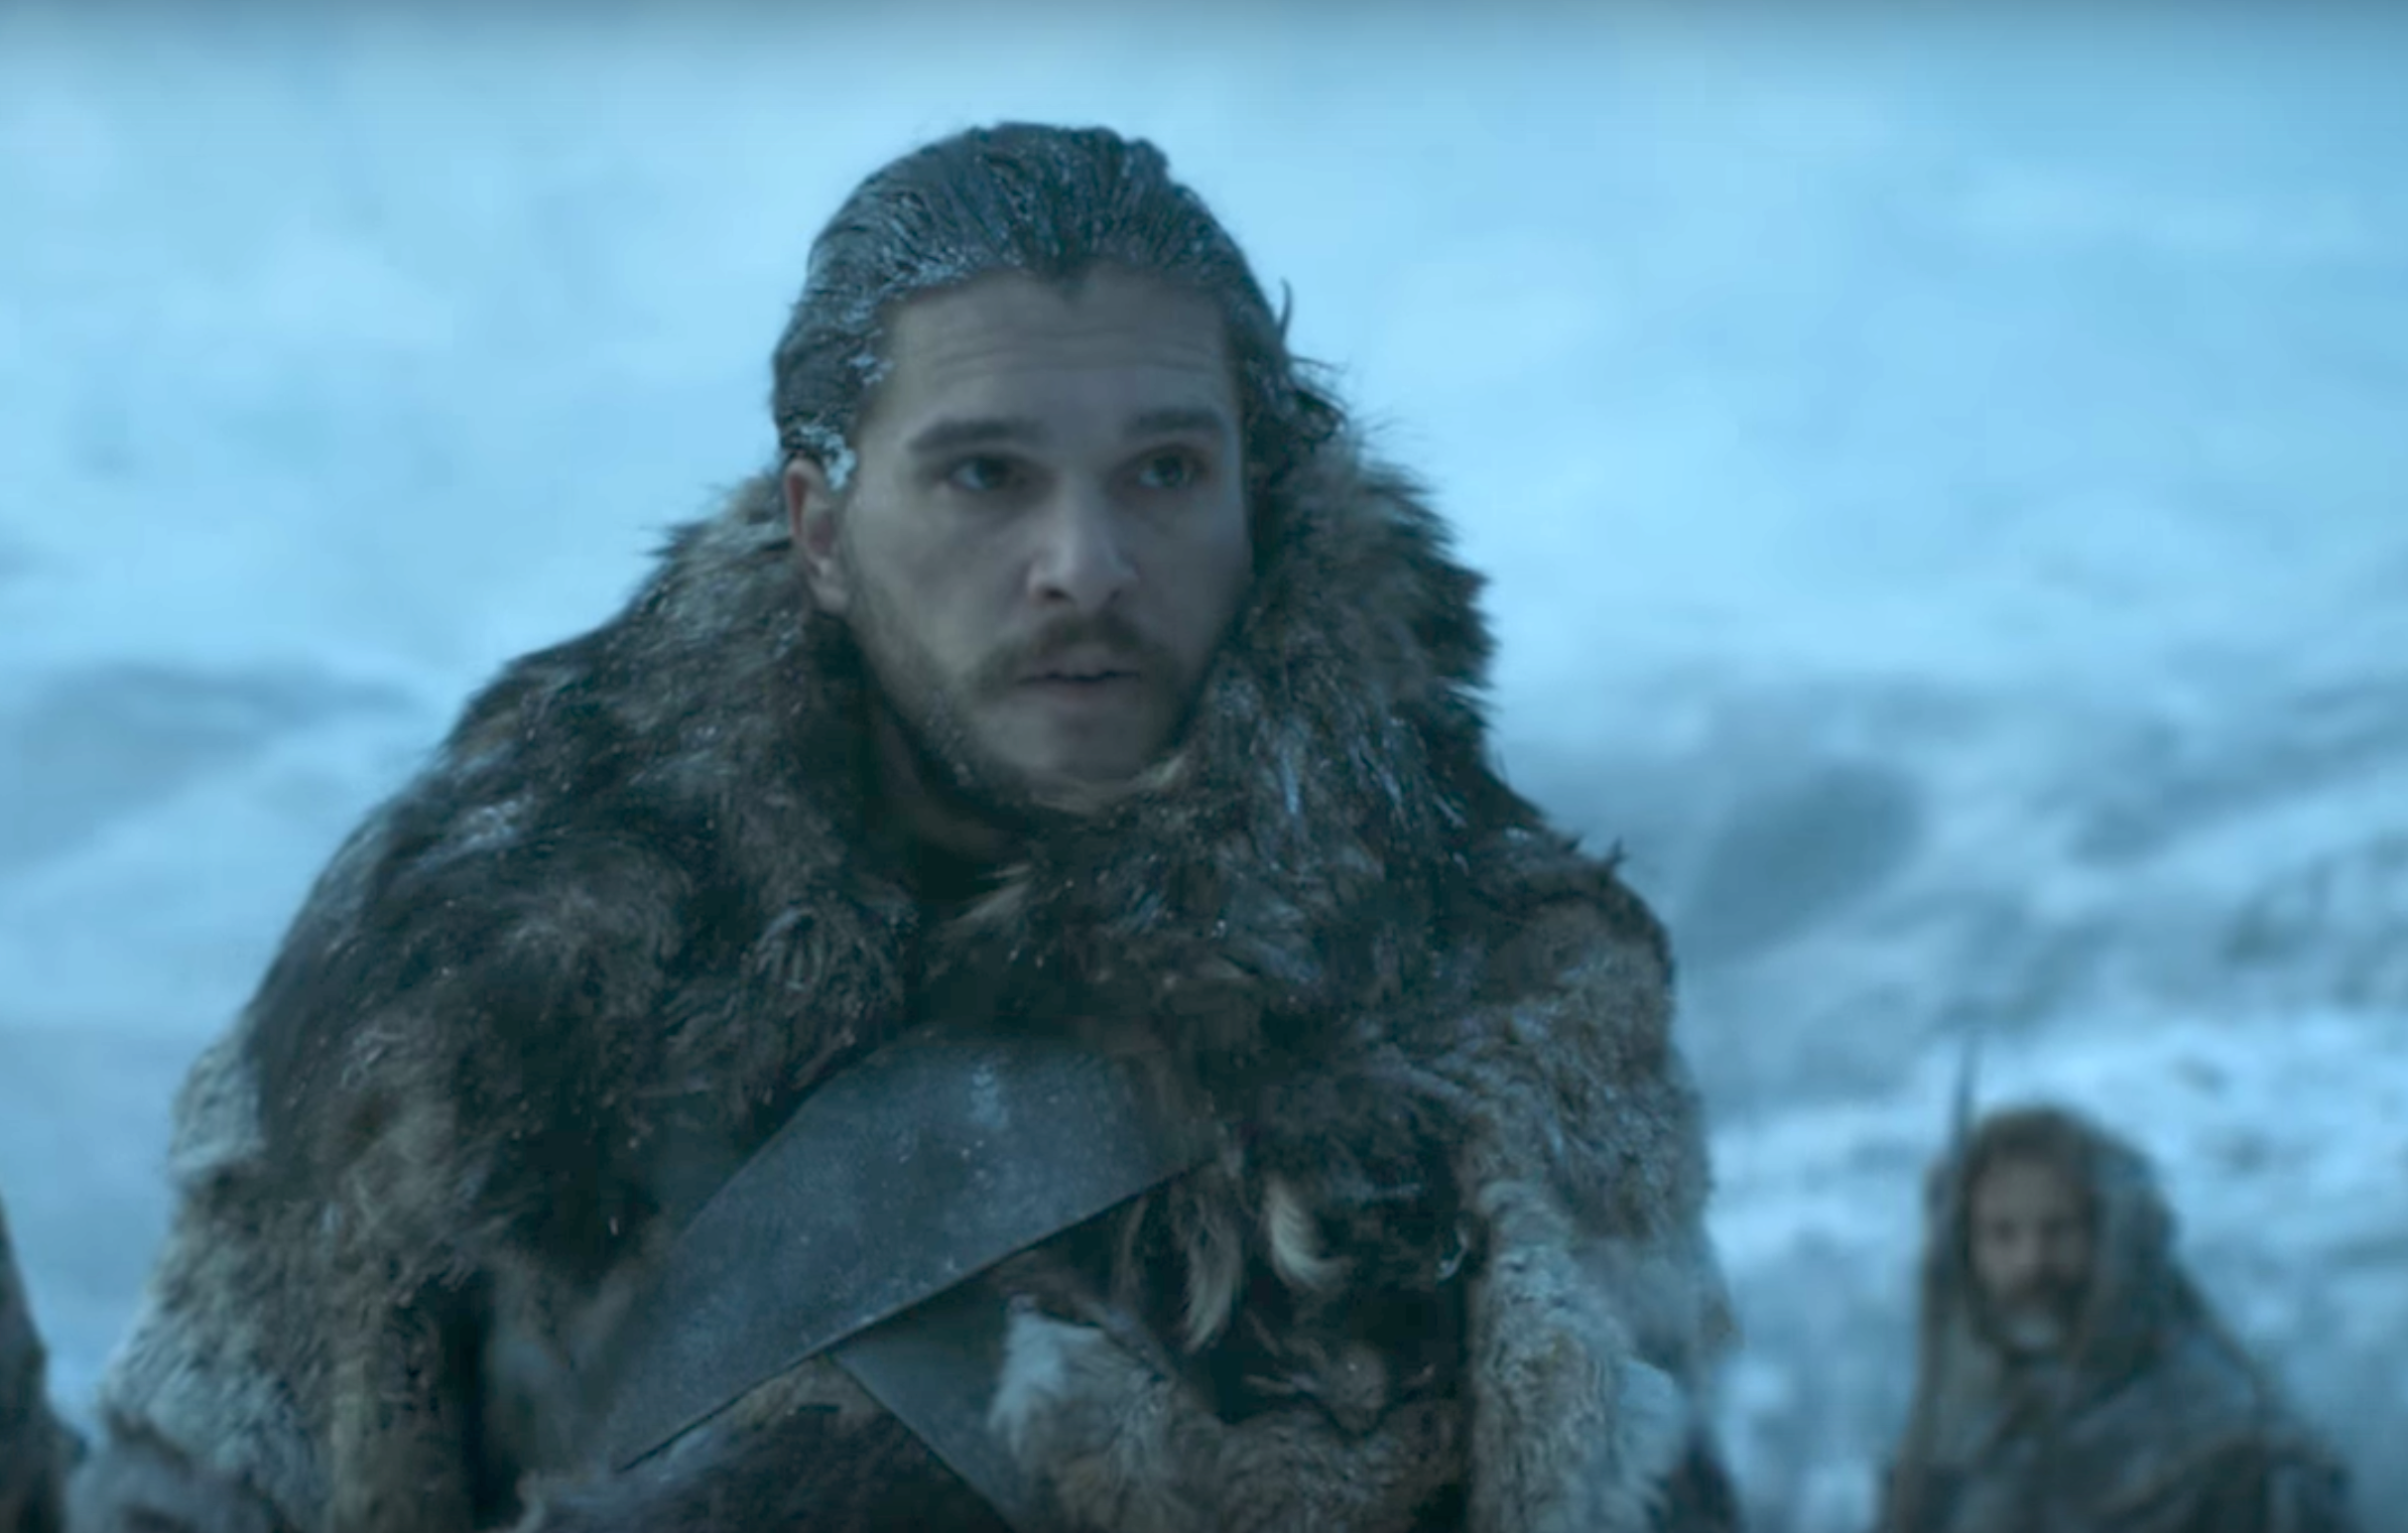 ⚔️ Only “Game of Thrones” Experts Can Pass This Season 7 Quiz. Can You? Jon Snow